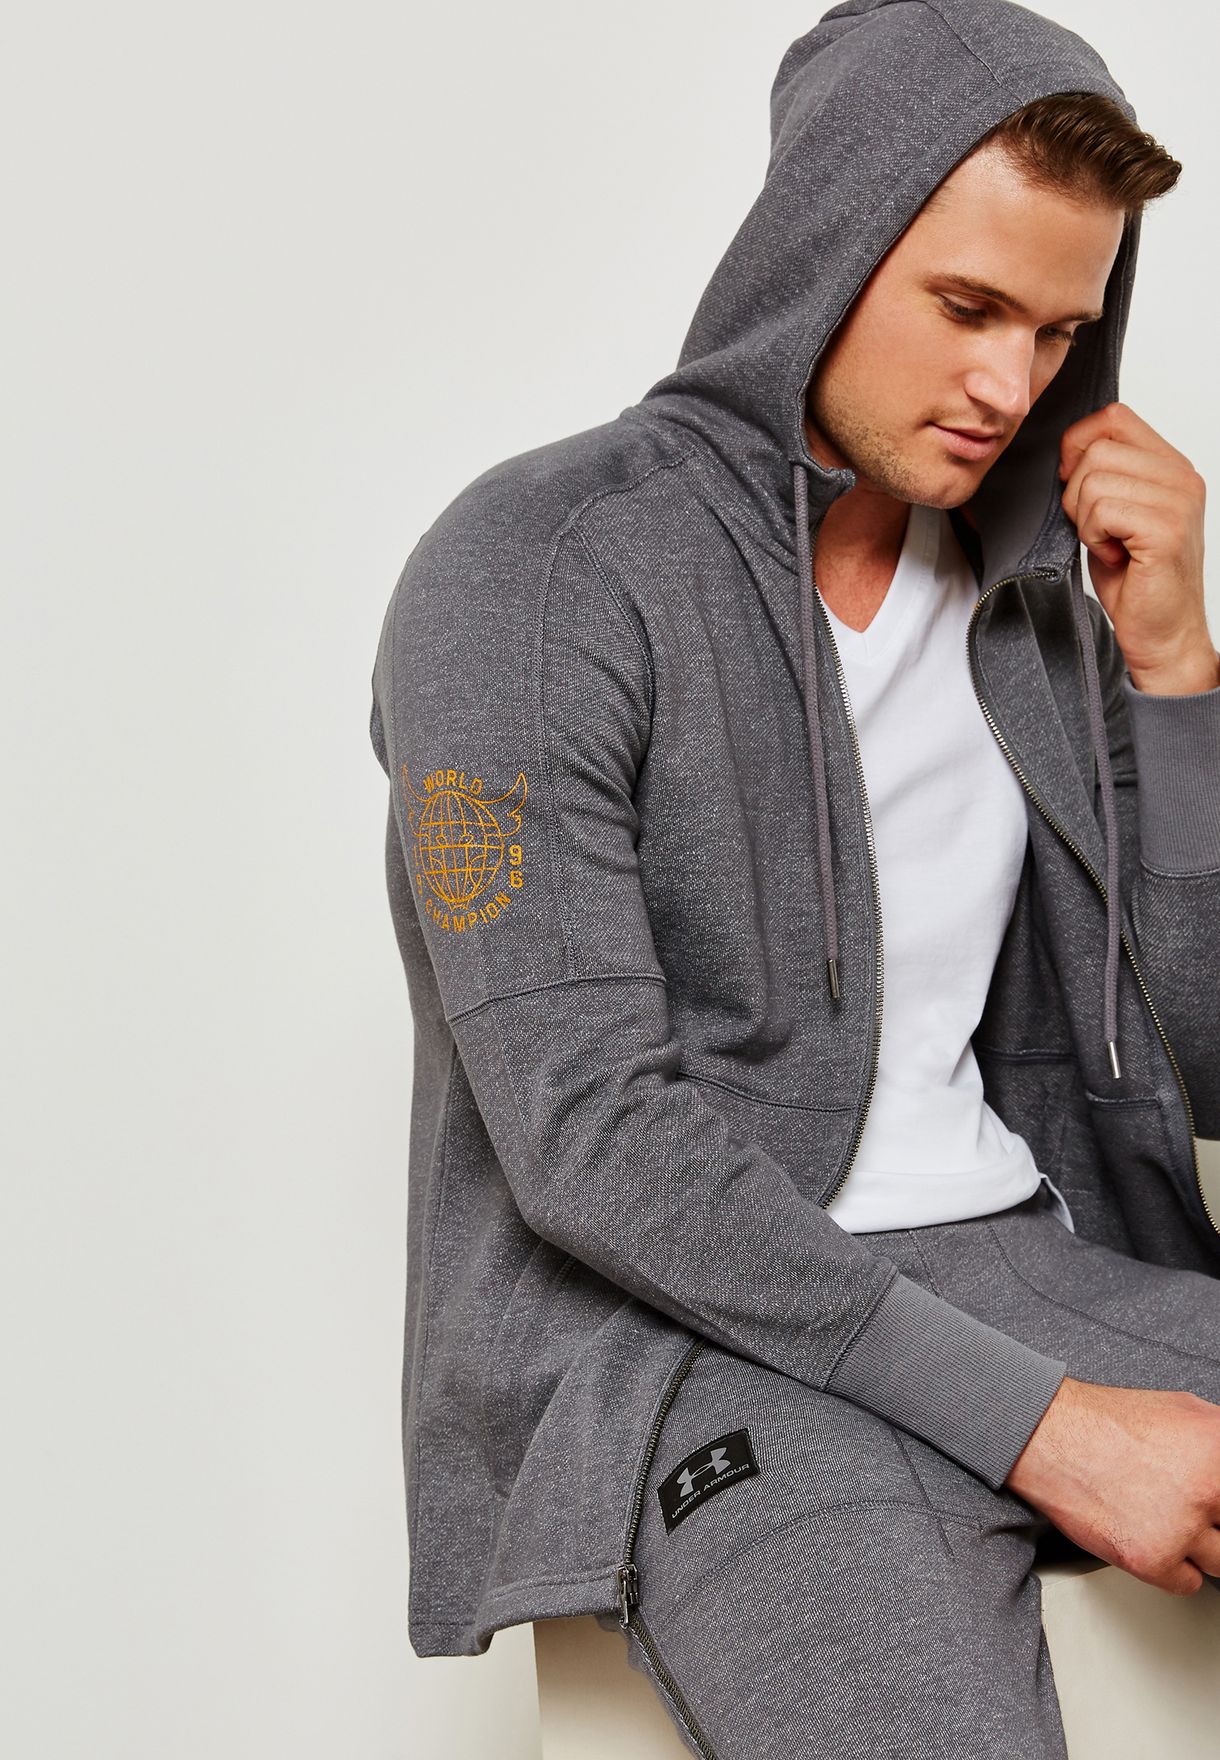 under armour hoodie the rock